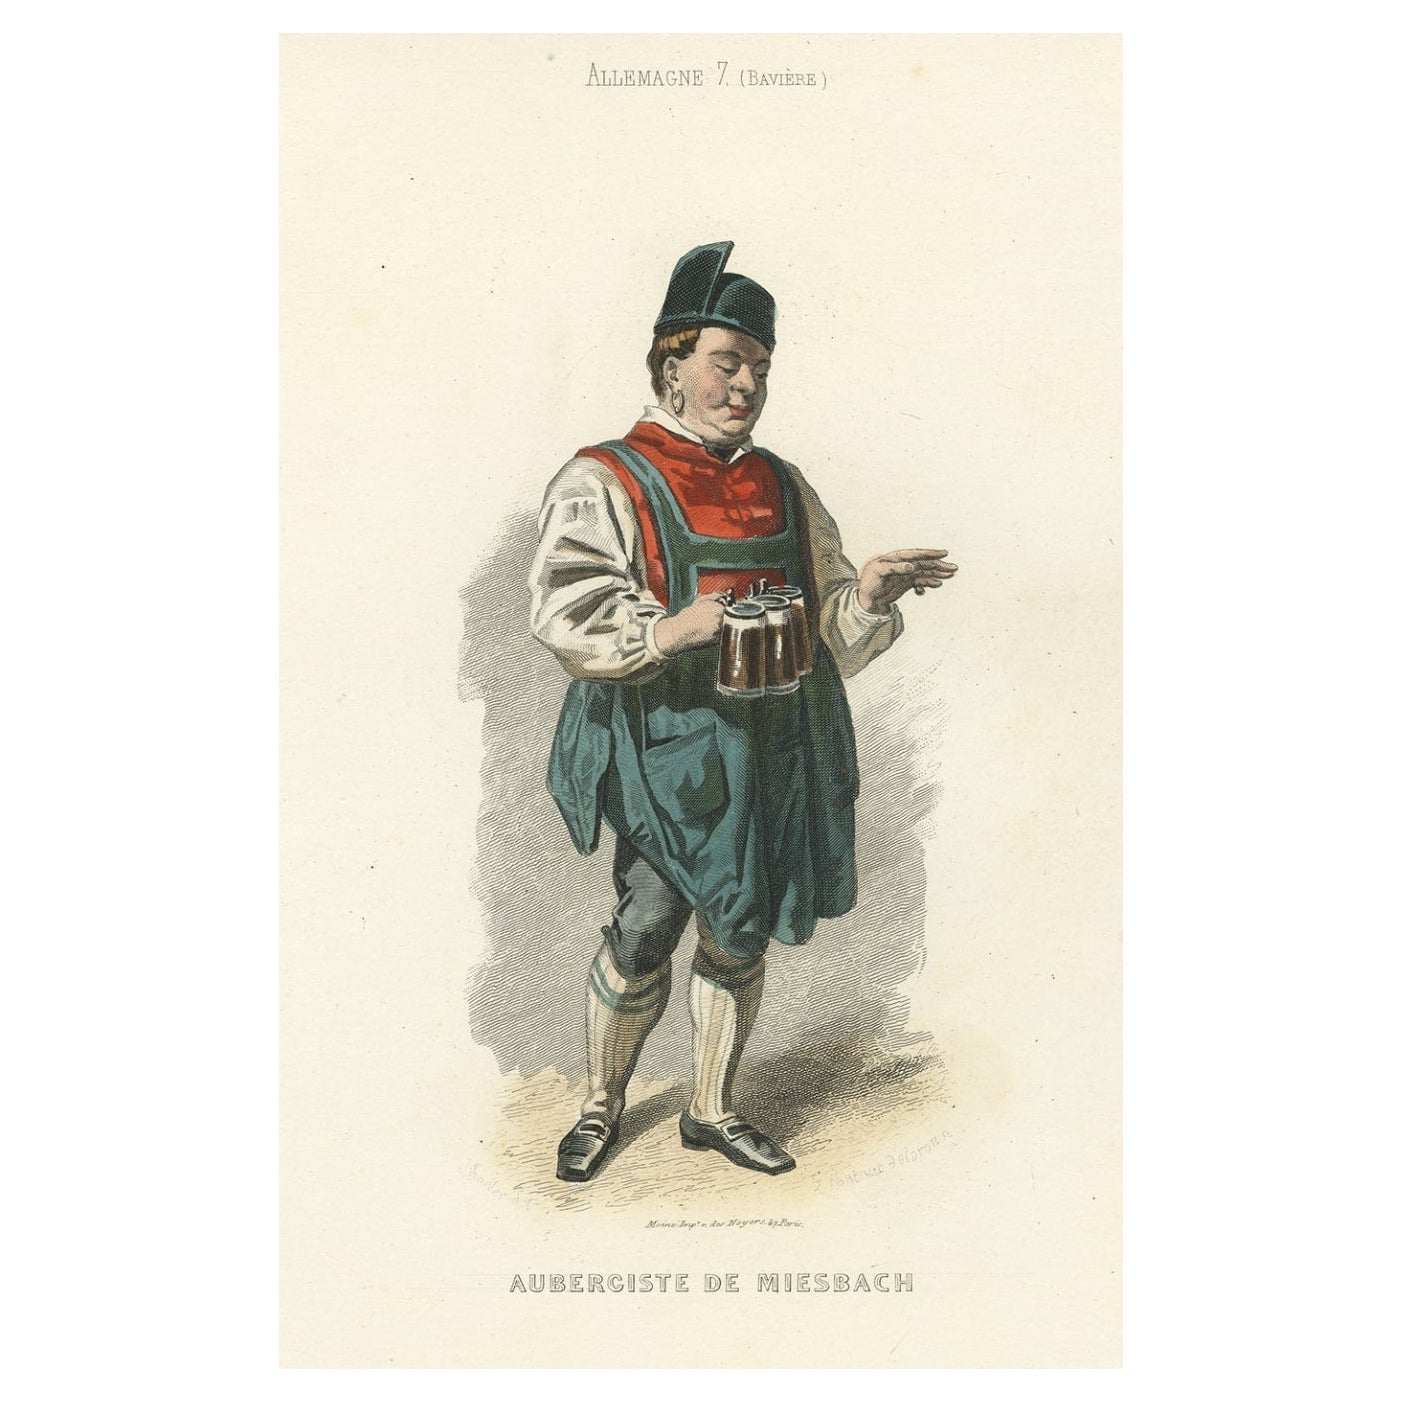 Antique Print of an Innkeeper from Miesbach, Bavariai in Germany, ca. 1850